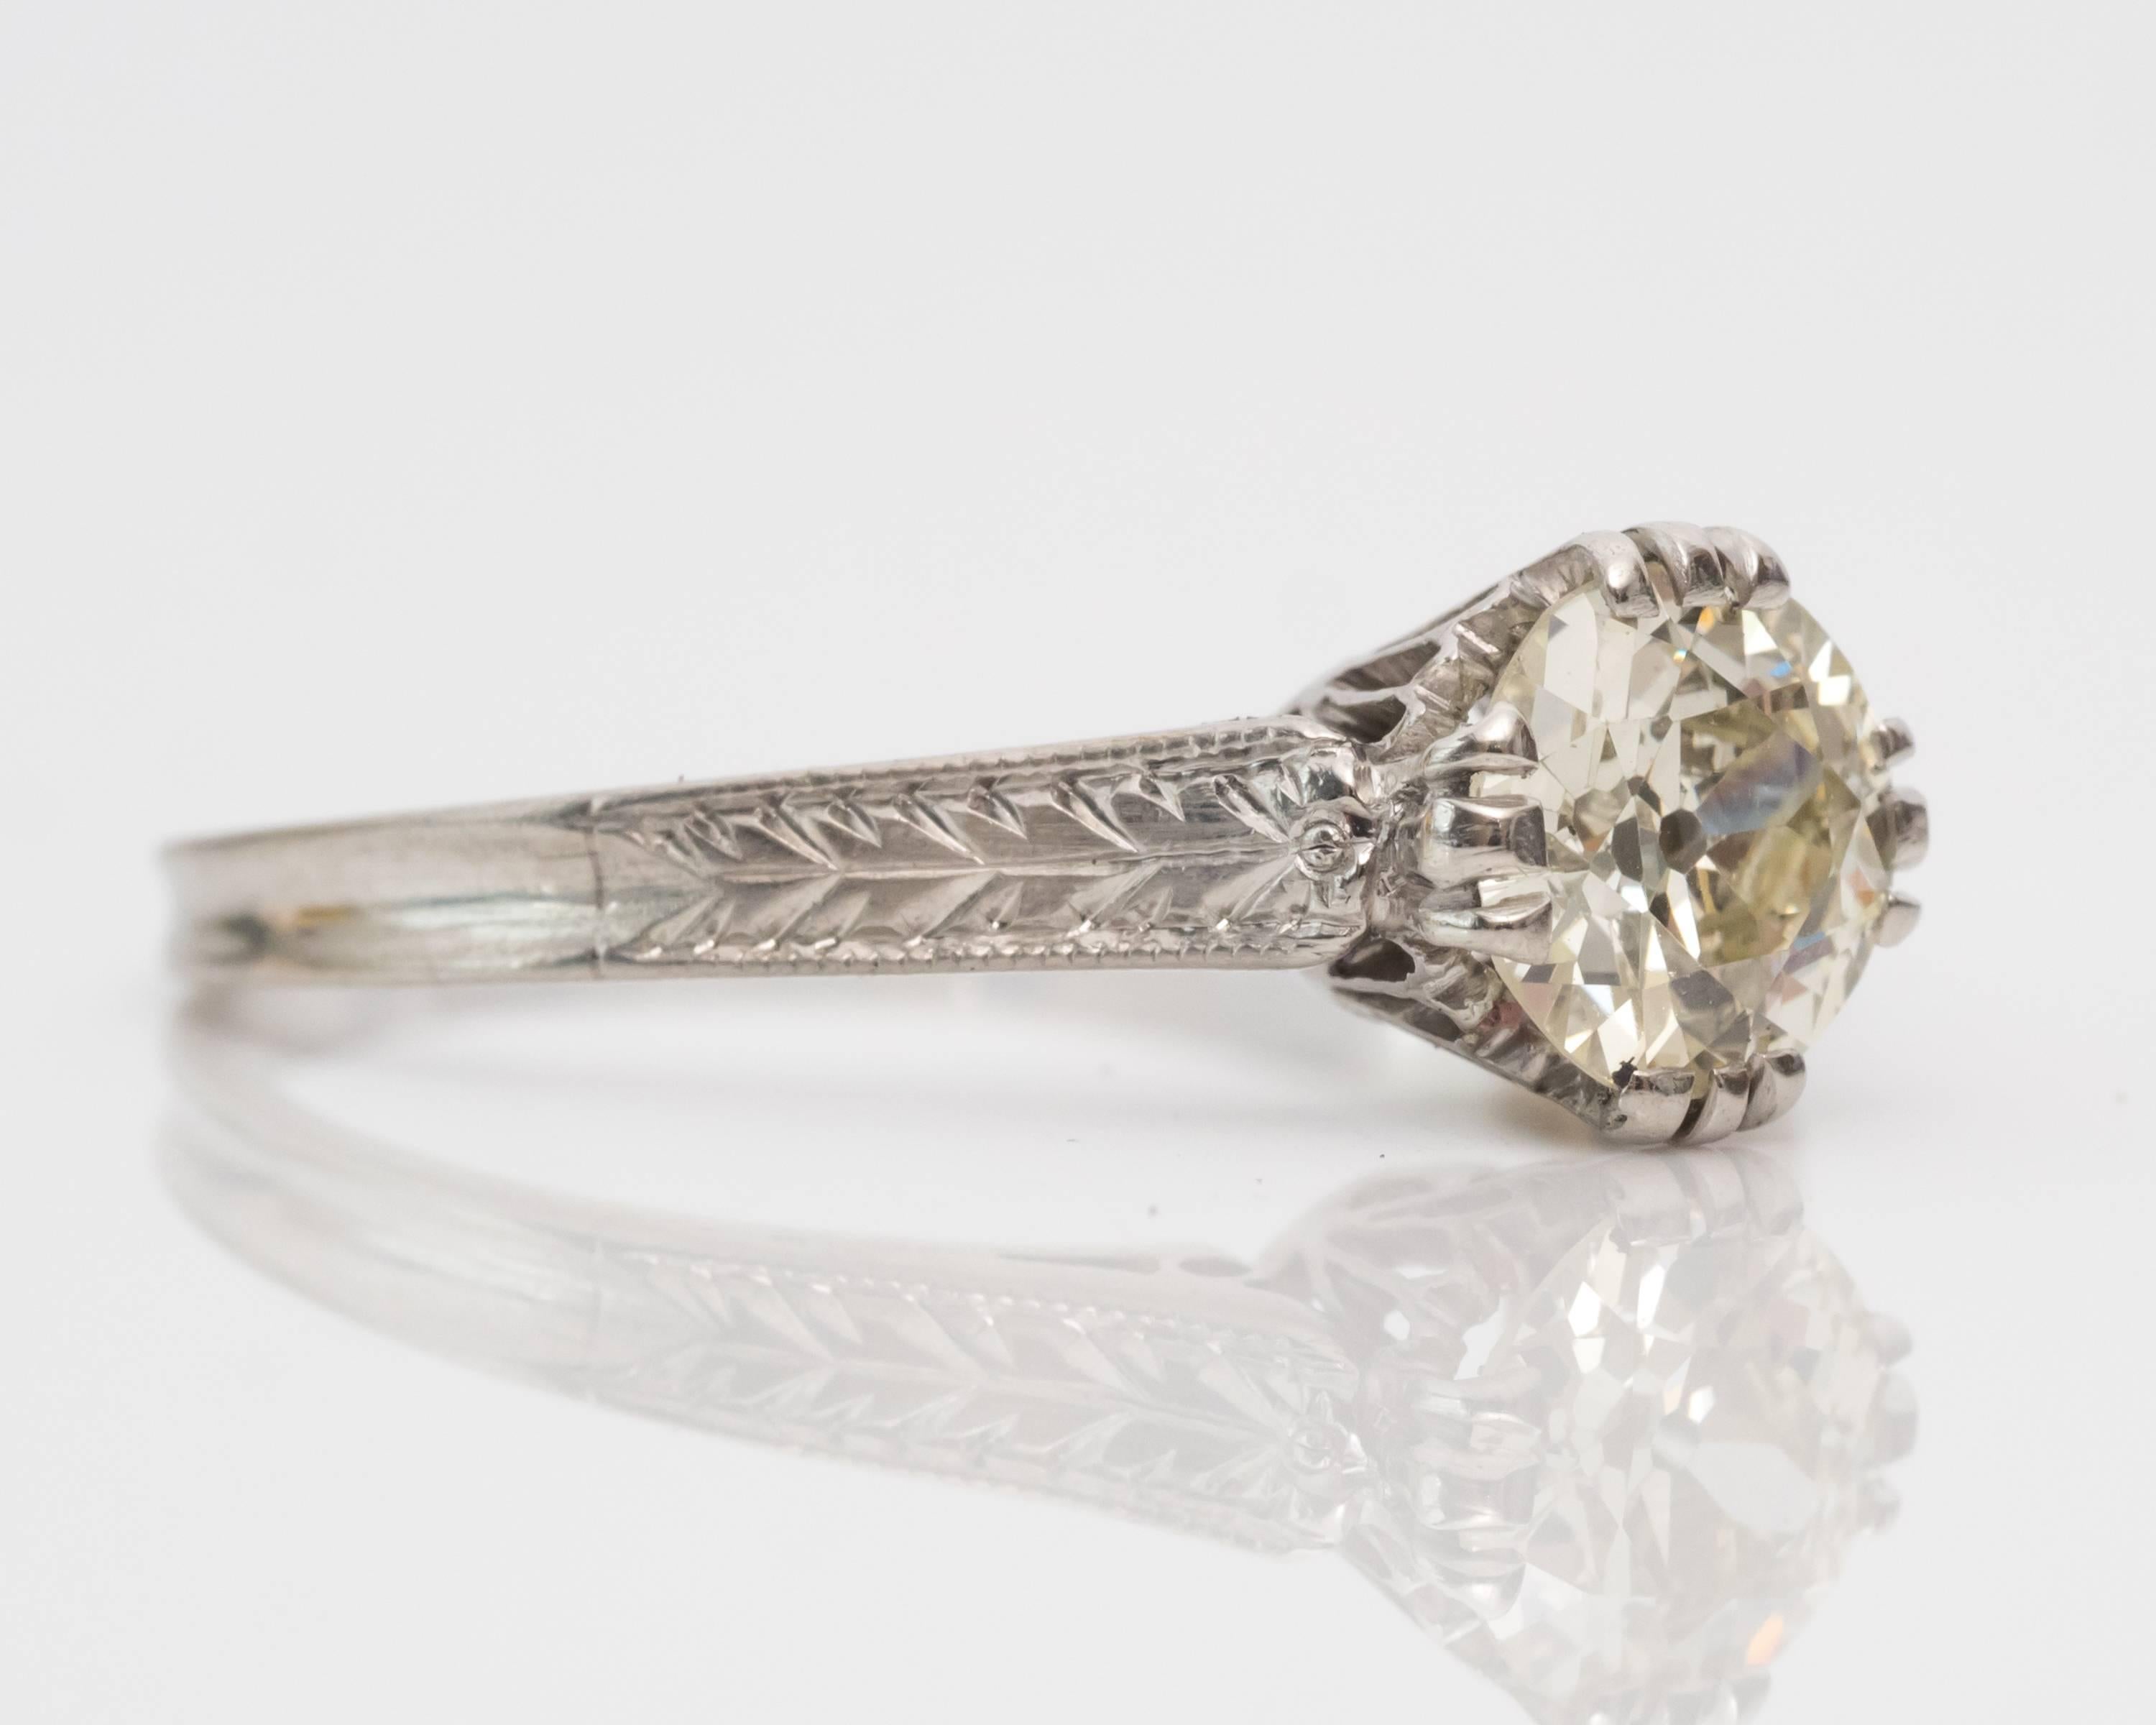 1930s GIA Certified 0.67 Carat Solitaire Diamond Platinum Engagement Ring. Lots of gorgeous intricate etchings and gallery work visible all over the ring. 

Center diamond is an Old European cut, set in a four fishtail prongs that taper to a floral